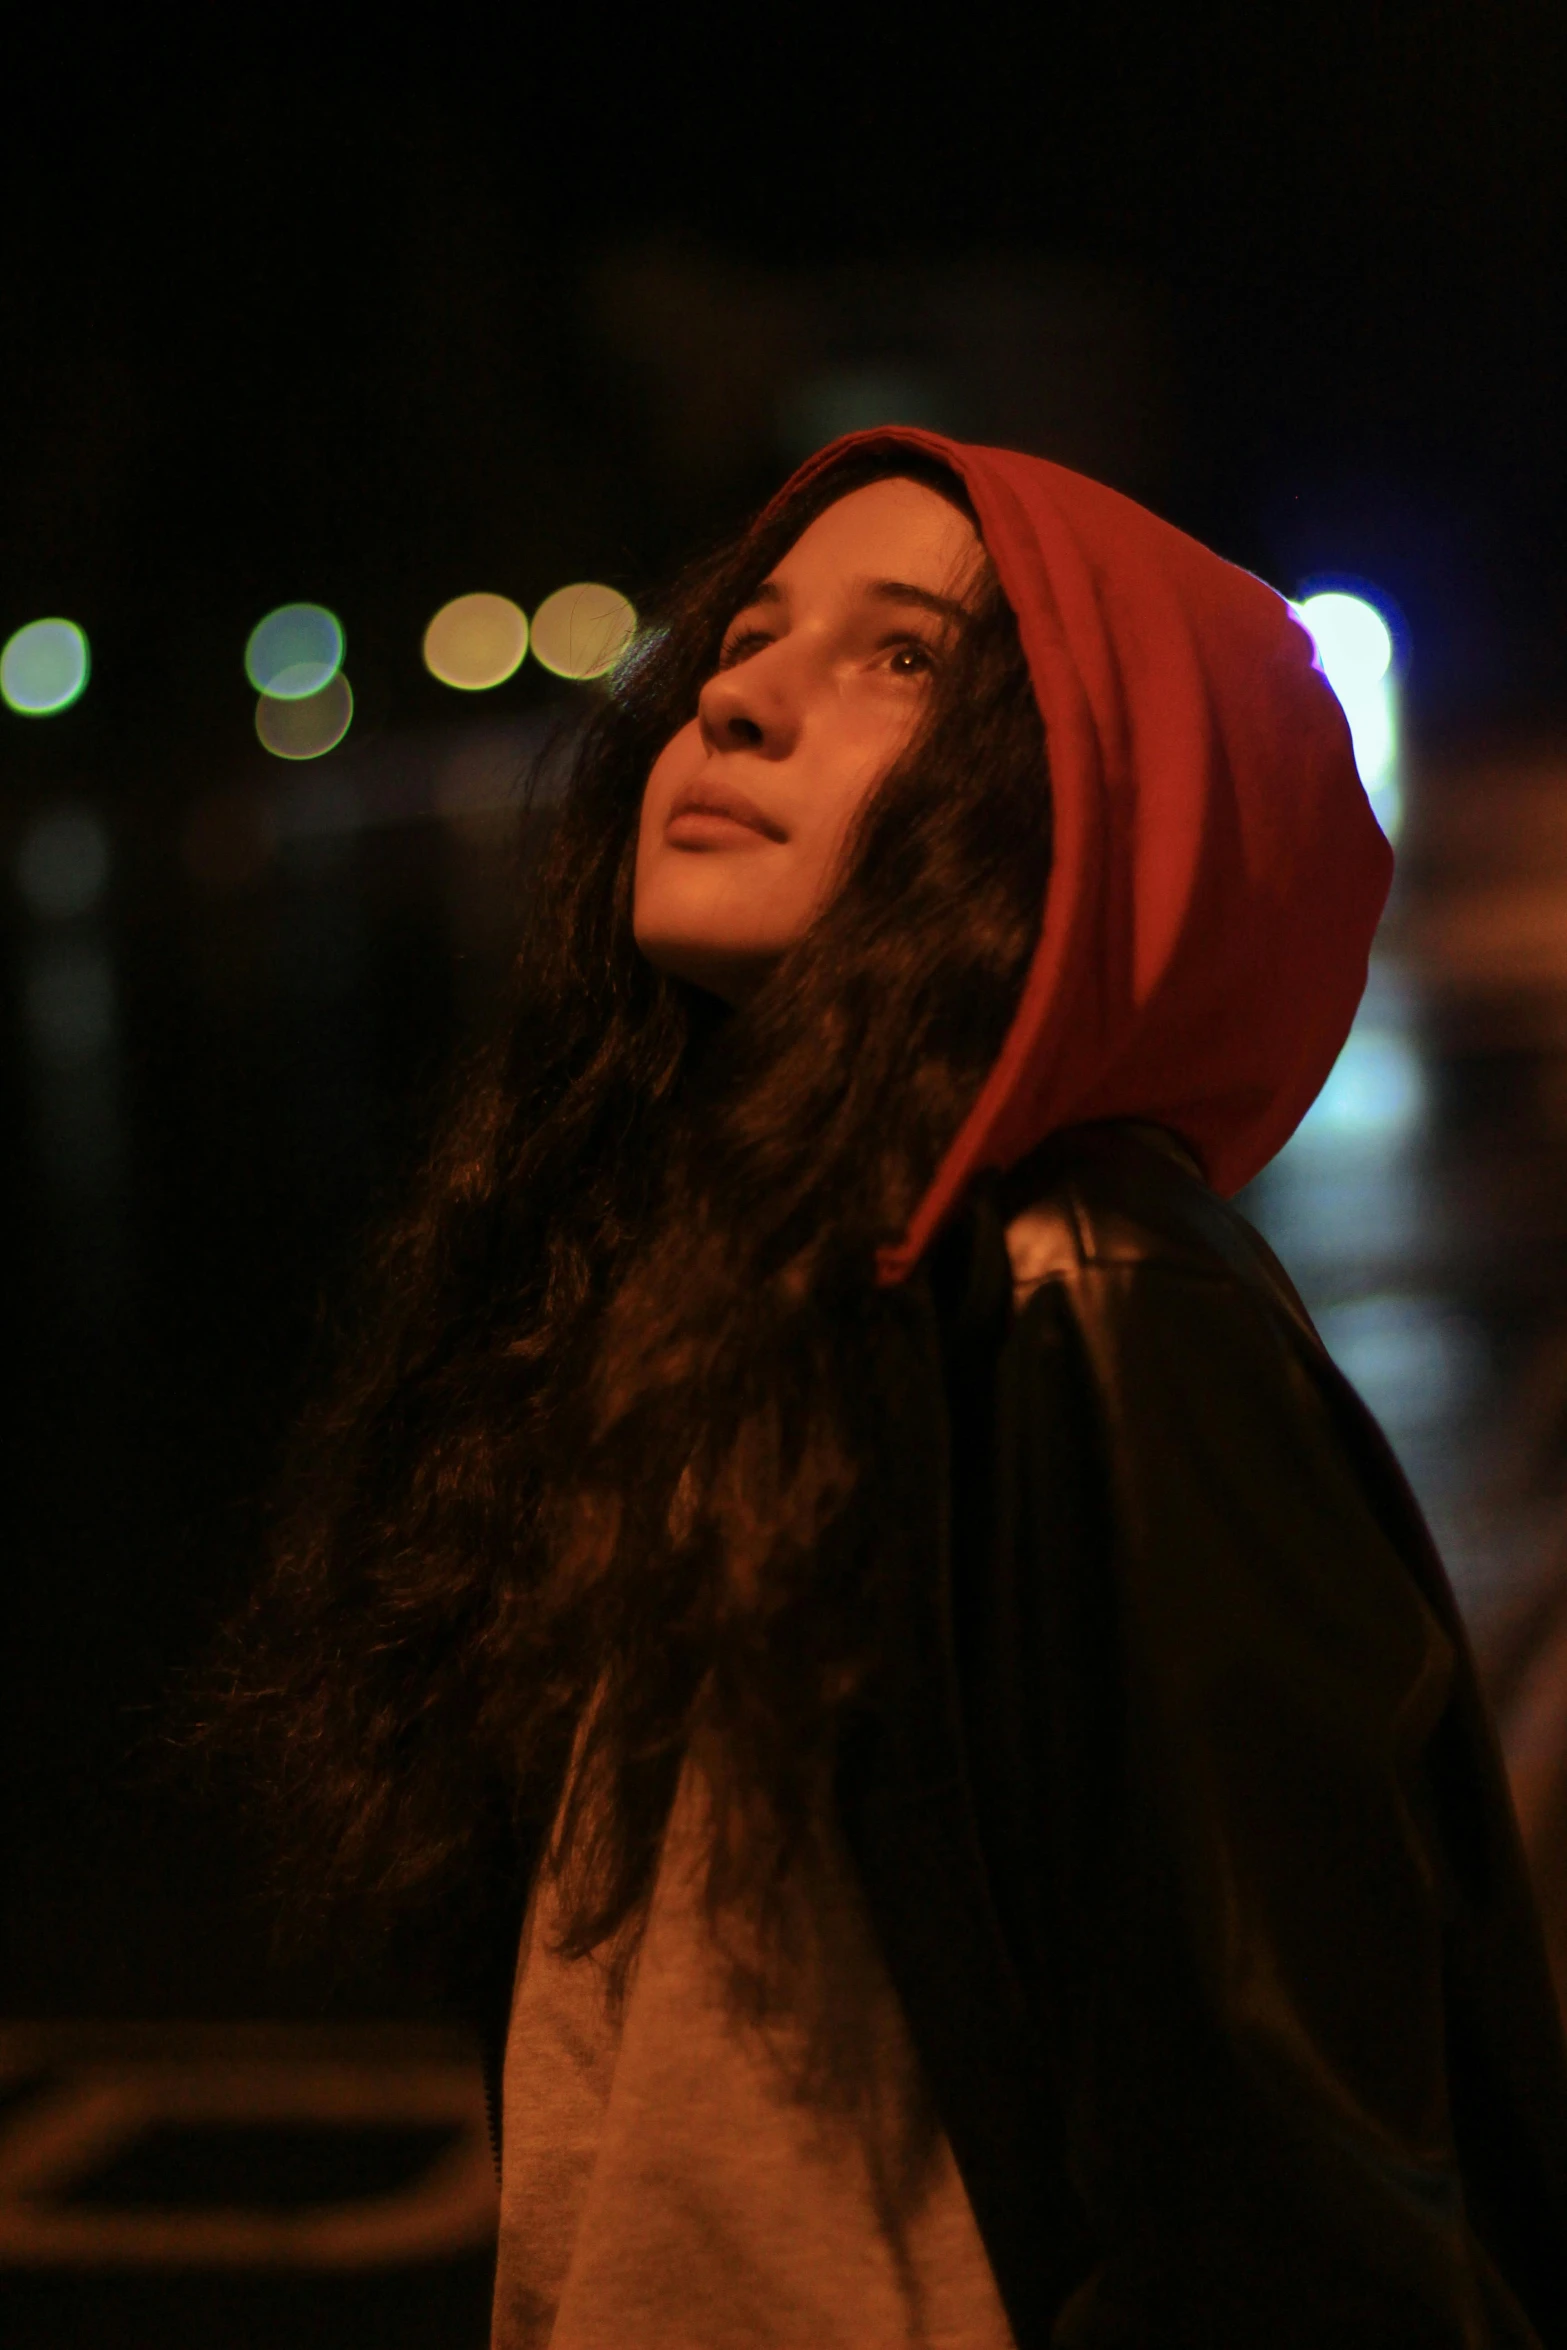 a woman standing on a city street at night, an album cover, pexels contest winner, renaissance, red cap, young woman with long dark hair, ( ( theatrical ) ), icon